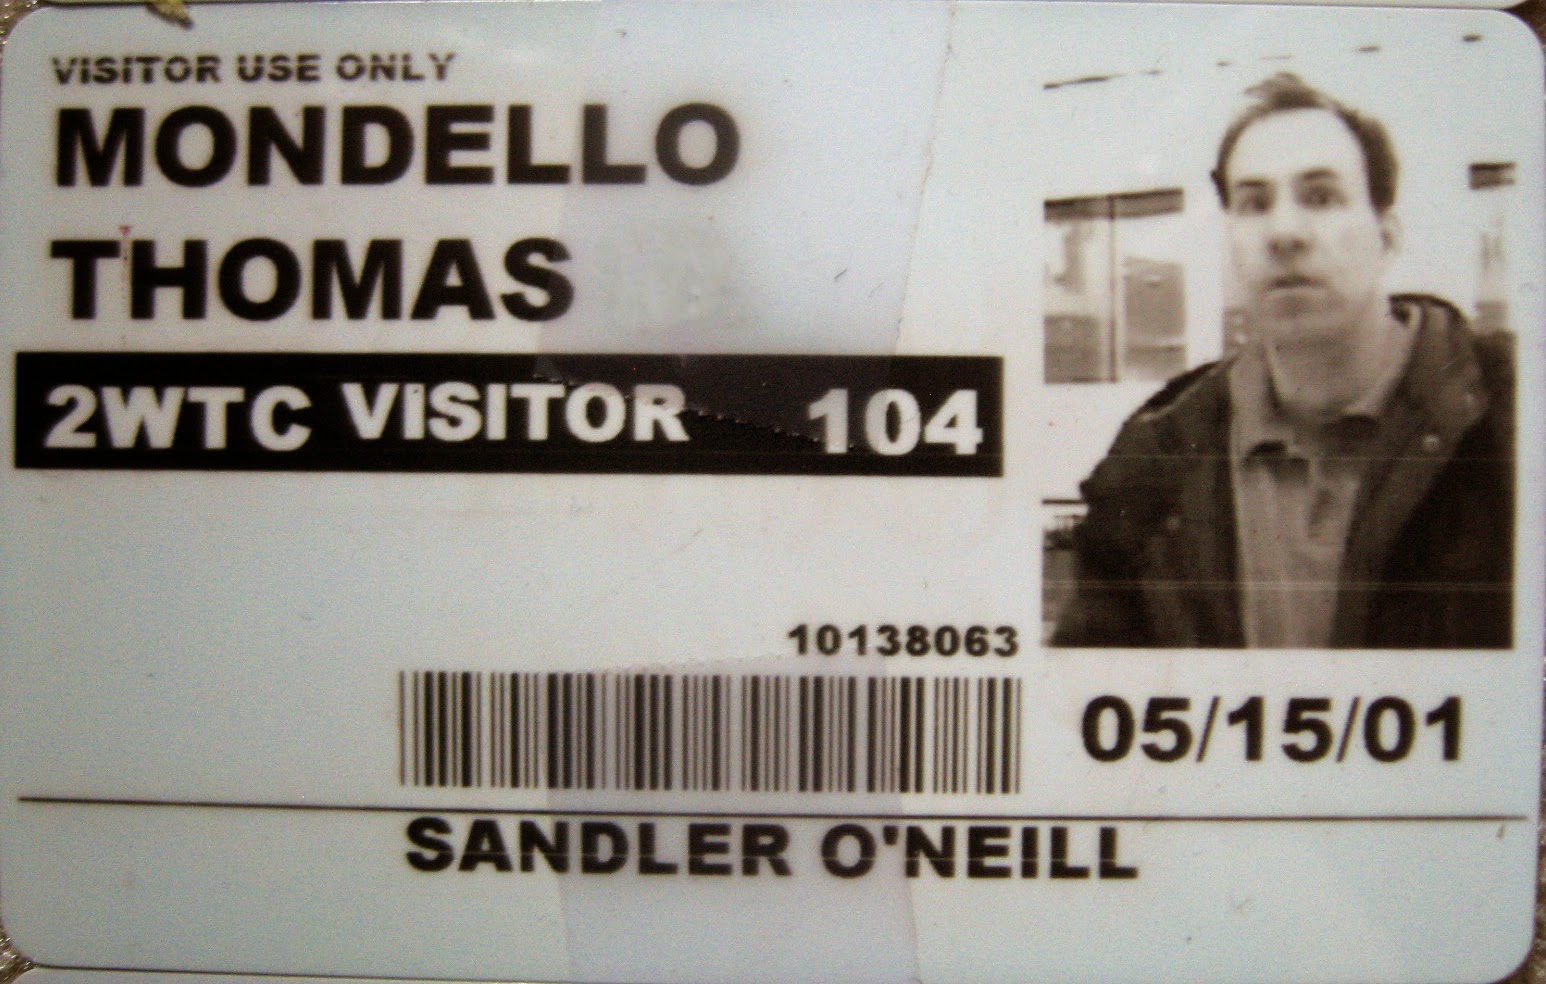 Tommy Mondello World Trade Center pass May 15, 2001